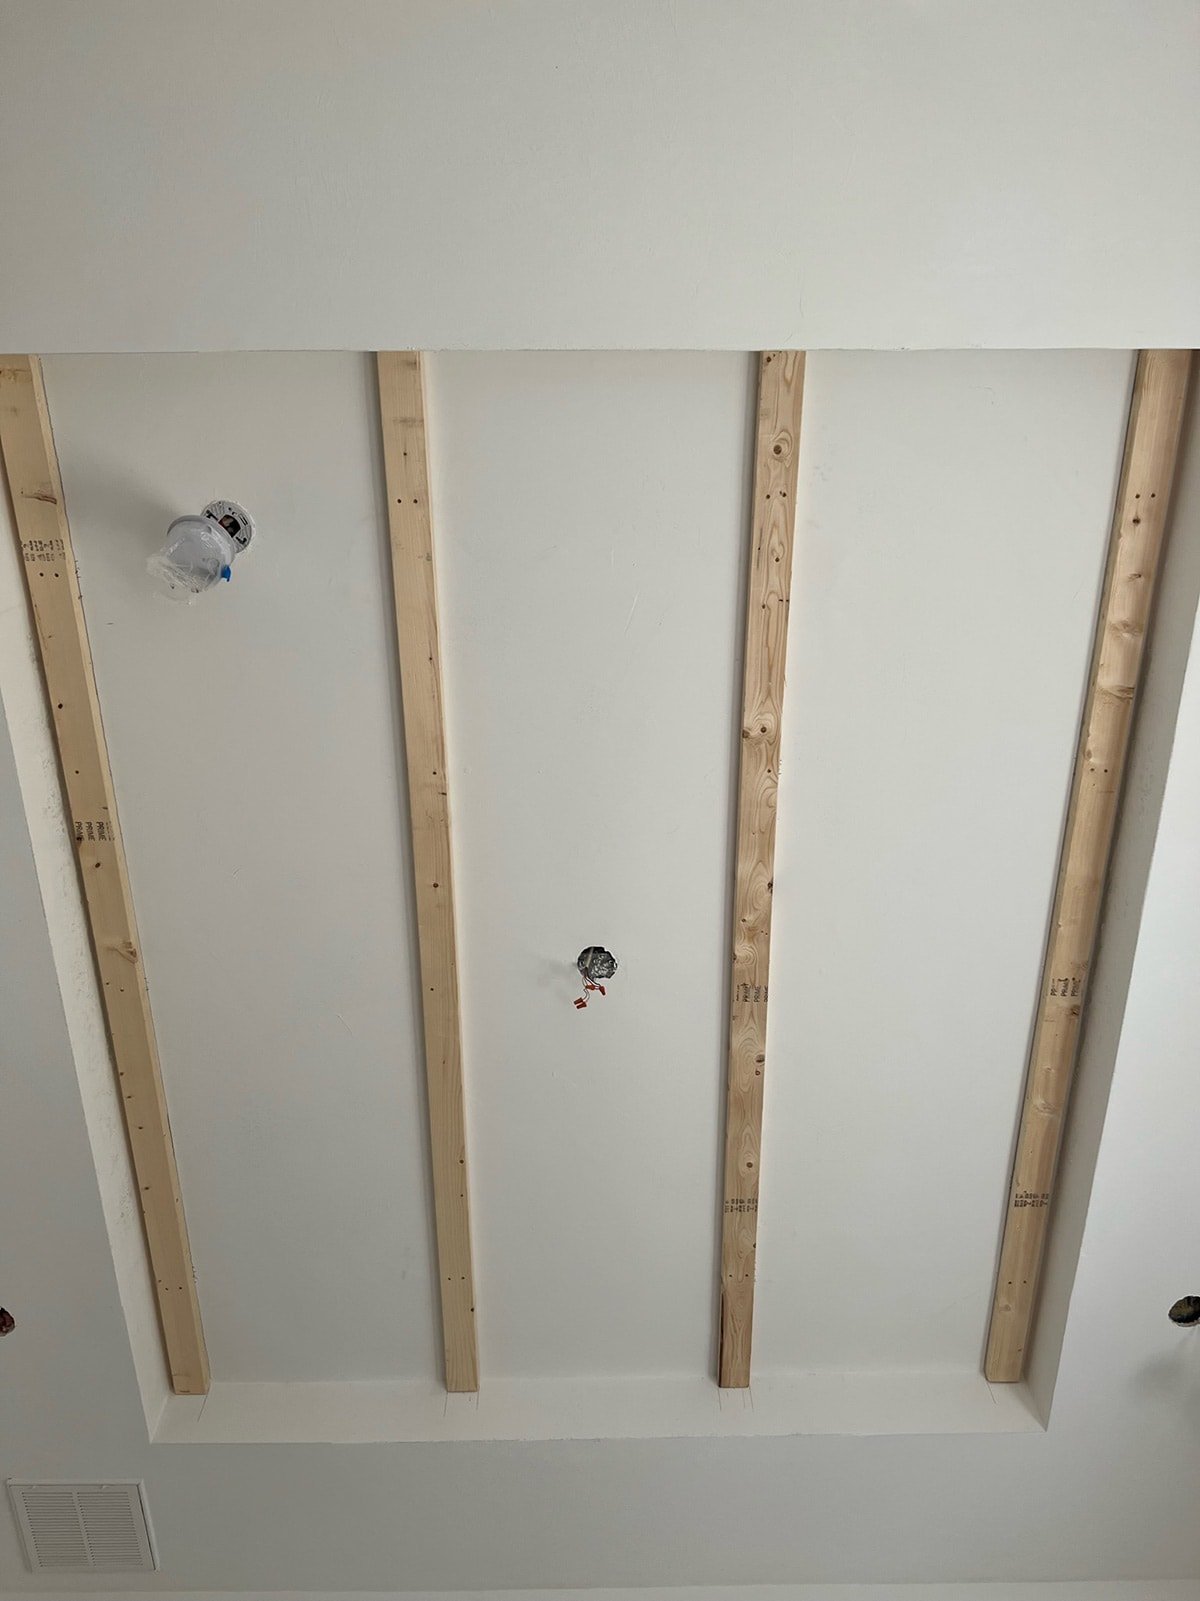 2x4s on ceiling for beam supports